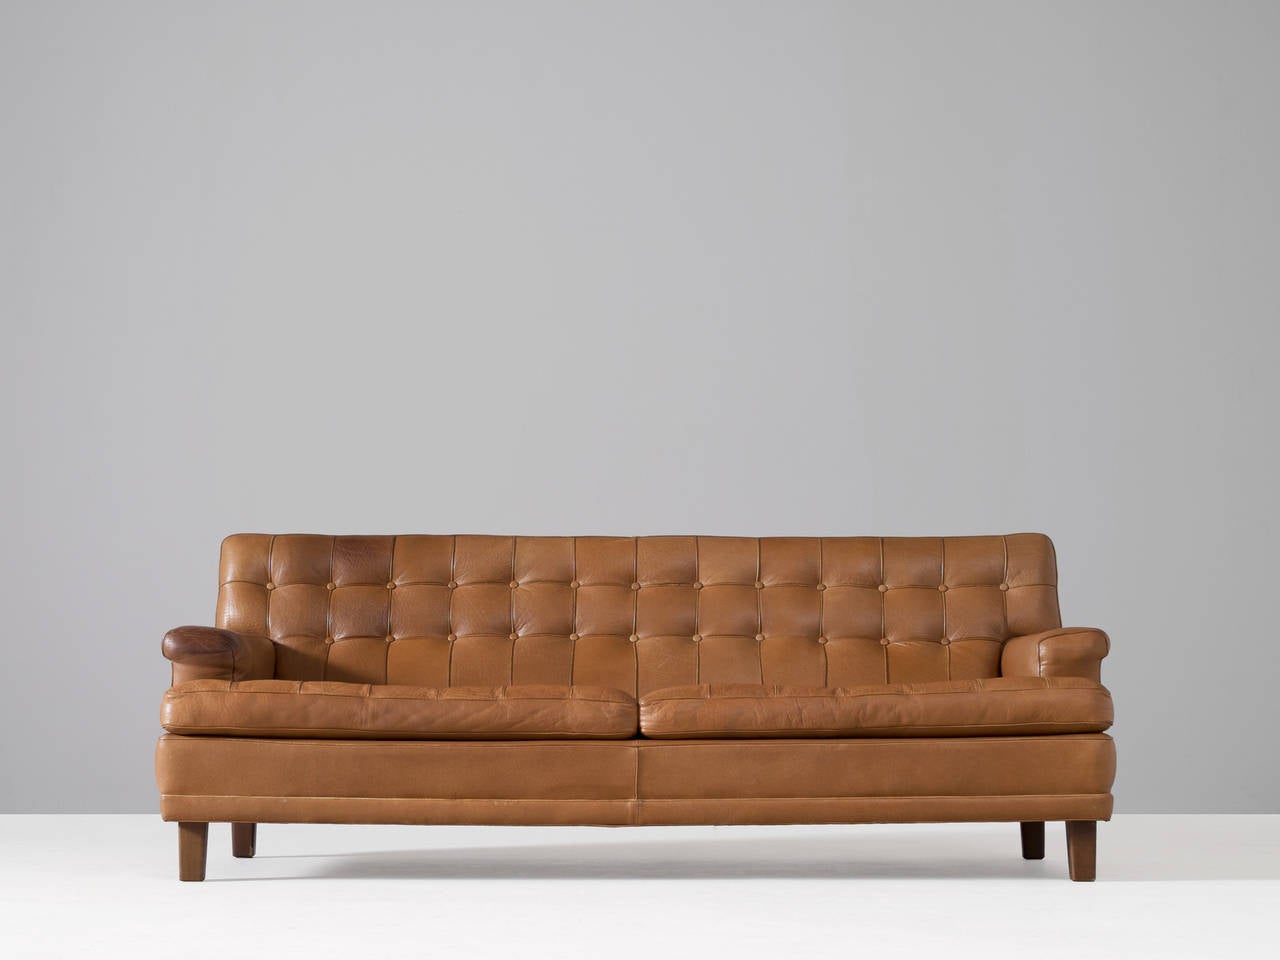 Sofa model 'Merkur', in leather and wood, by Arne Norell, Sweden, 1960s. 

This three-seat sofa is designed by Swedish designer Arne Norell. Wonderful proportioned and highly comfortable sofa. The tufted cushions with leather buttons and piping